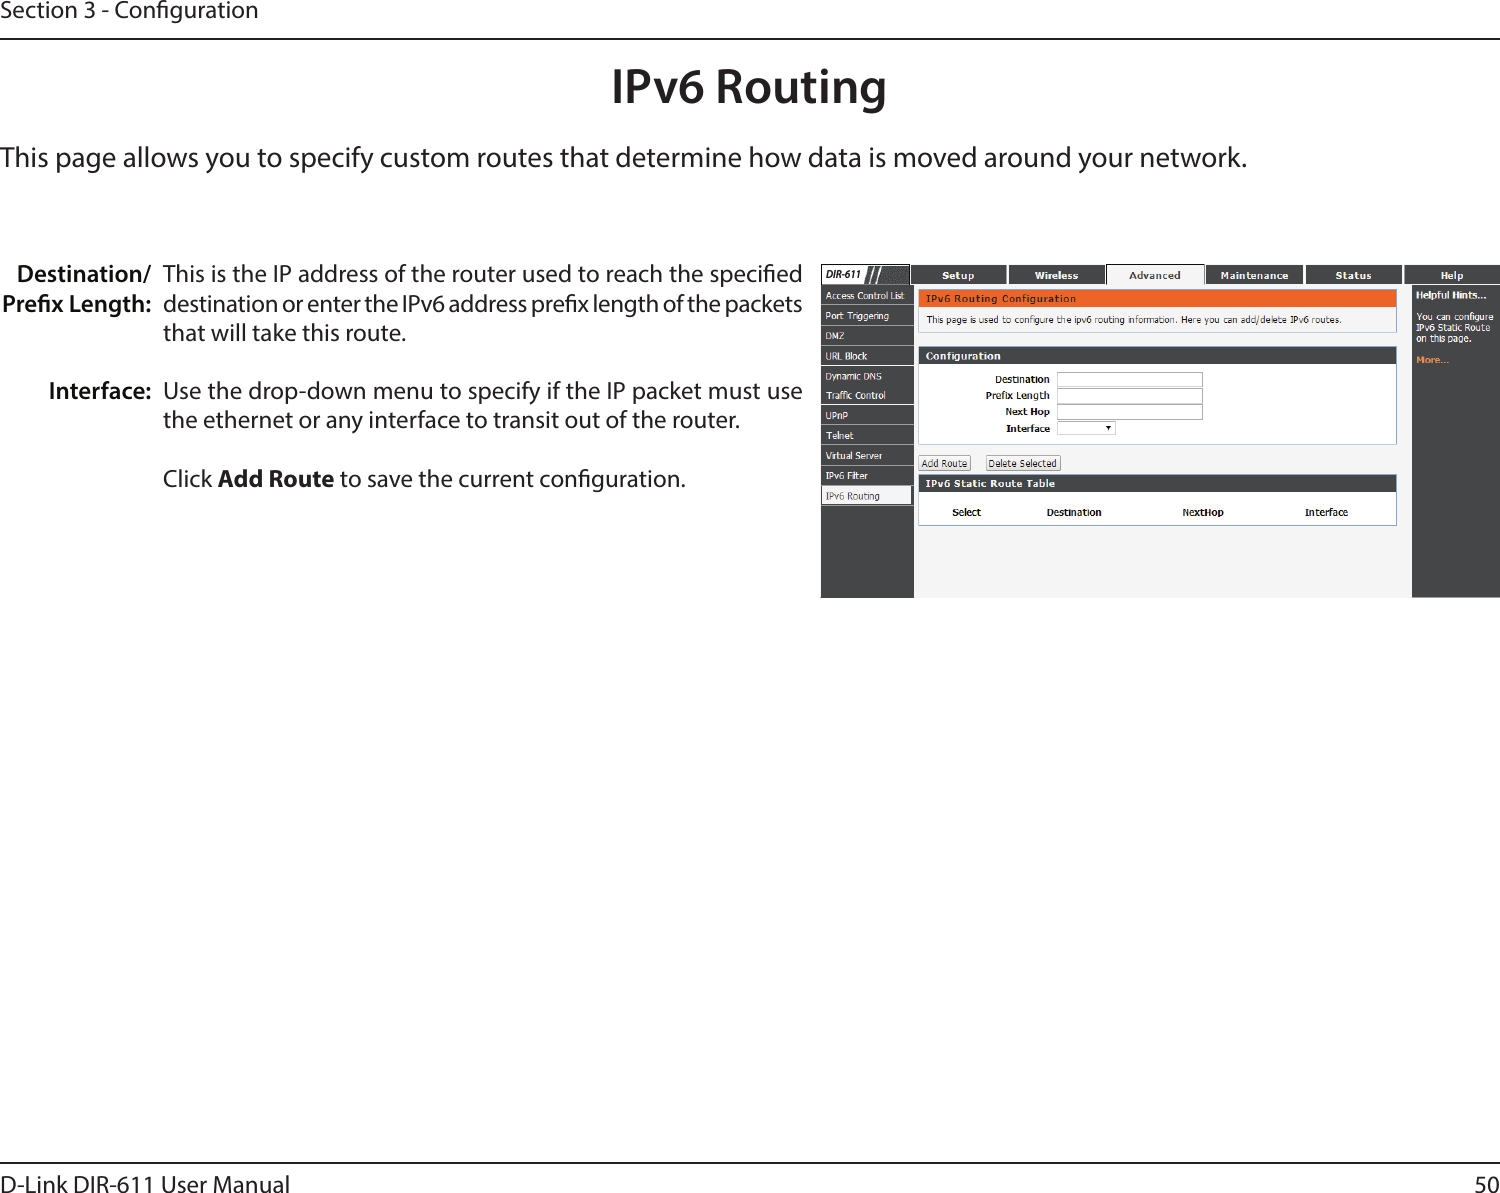 50D-Link DIR-611 User ManualSection 3 - CongurationIPv6 RoutingThis is the IP address of the router used to reach the specied destination or enter the IPv6 address prex length of the packets that will take this route. Use the drop-down menu to specify if the IP packet must use the ethernet or any interface to transit out of the router.Click Add Route to save the current conguration.Destination/Prex Length:Interface:This page allows you to specify custom routes that determine how data is moved around your network. DIR-611